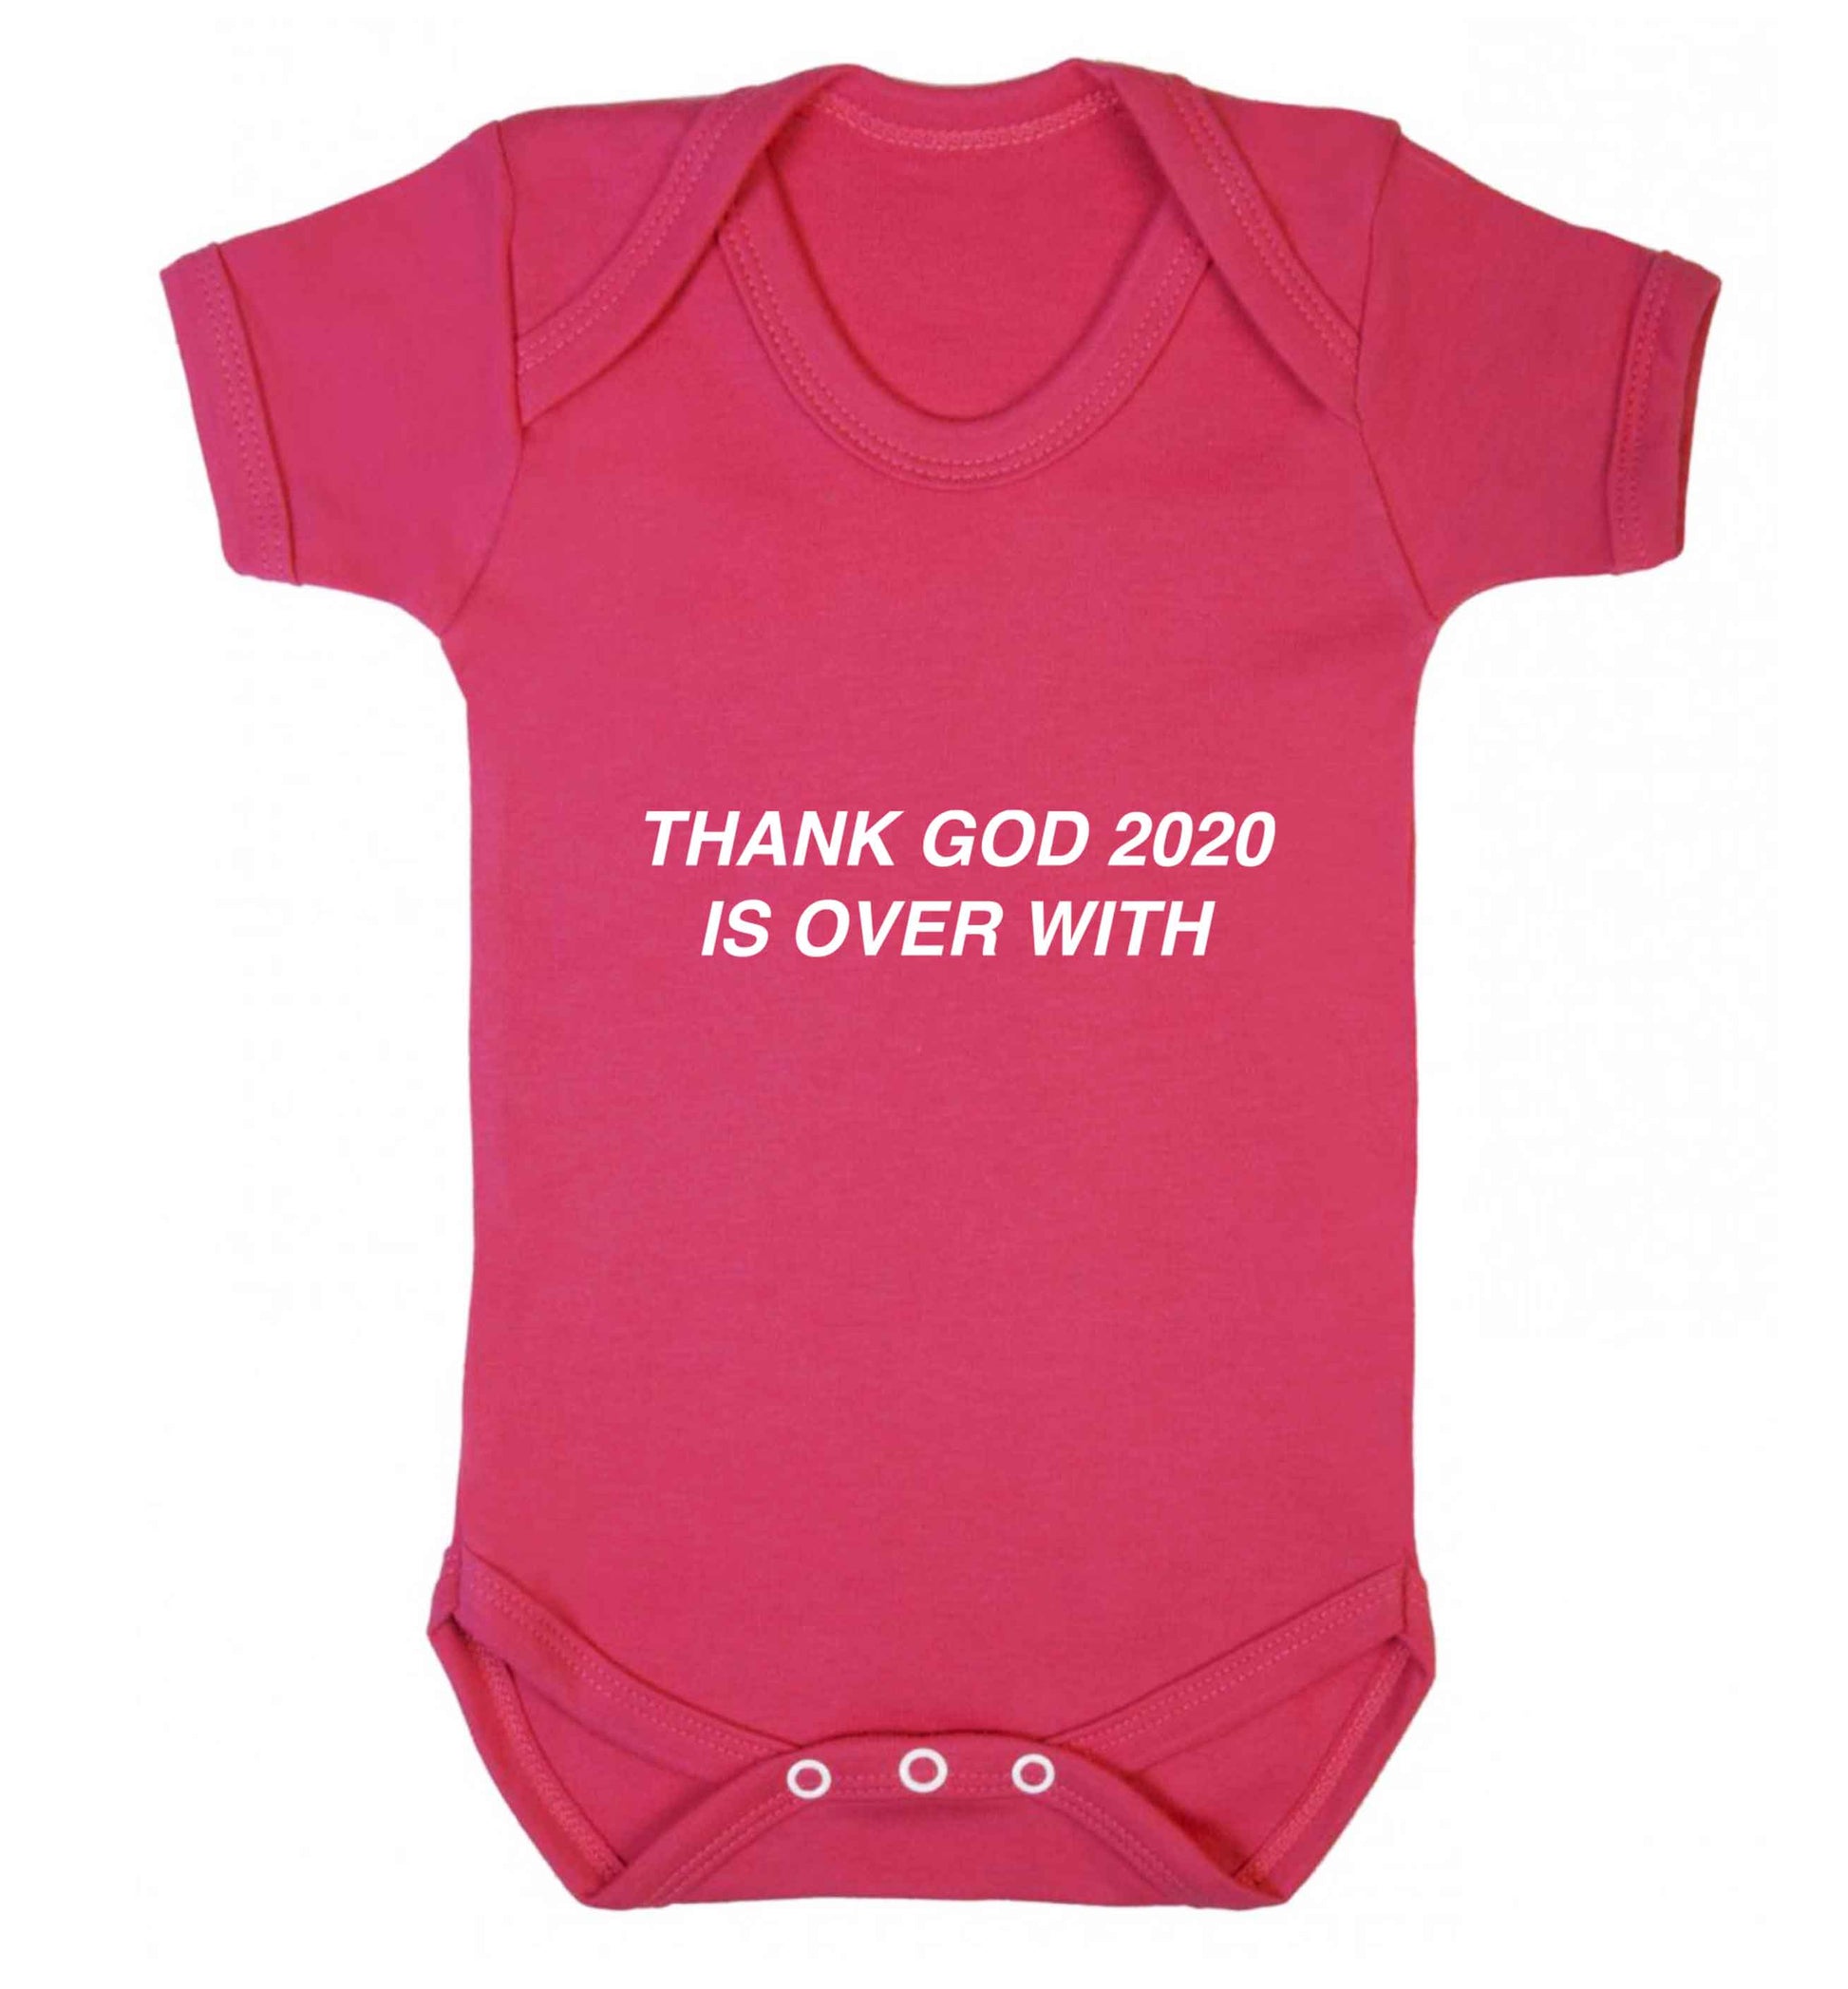 Thank god 2020 is over with baby vest dark pink 18-24 months